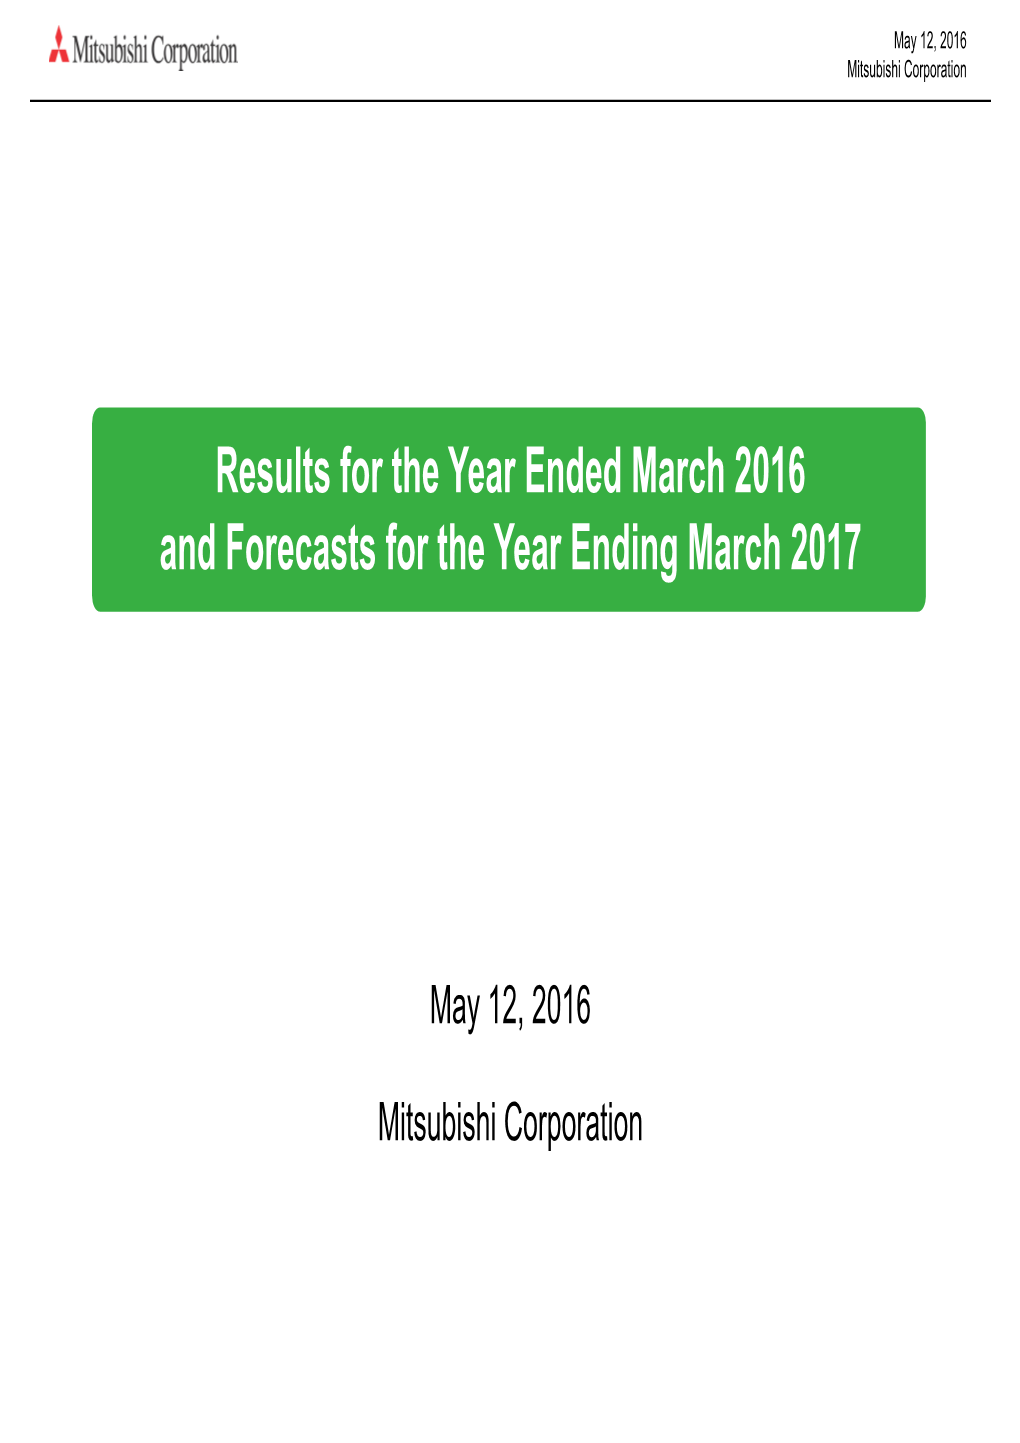 Results for the Year Ended March 2016 and Forecasts for the Year Ending March 2017